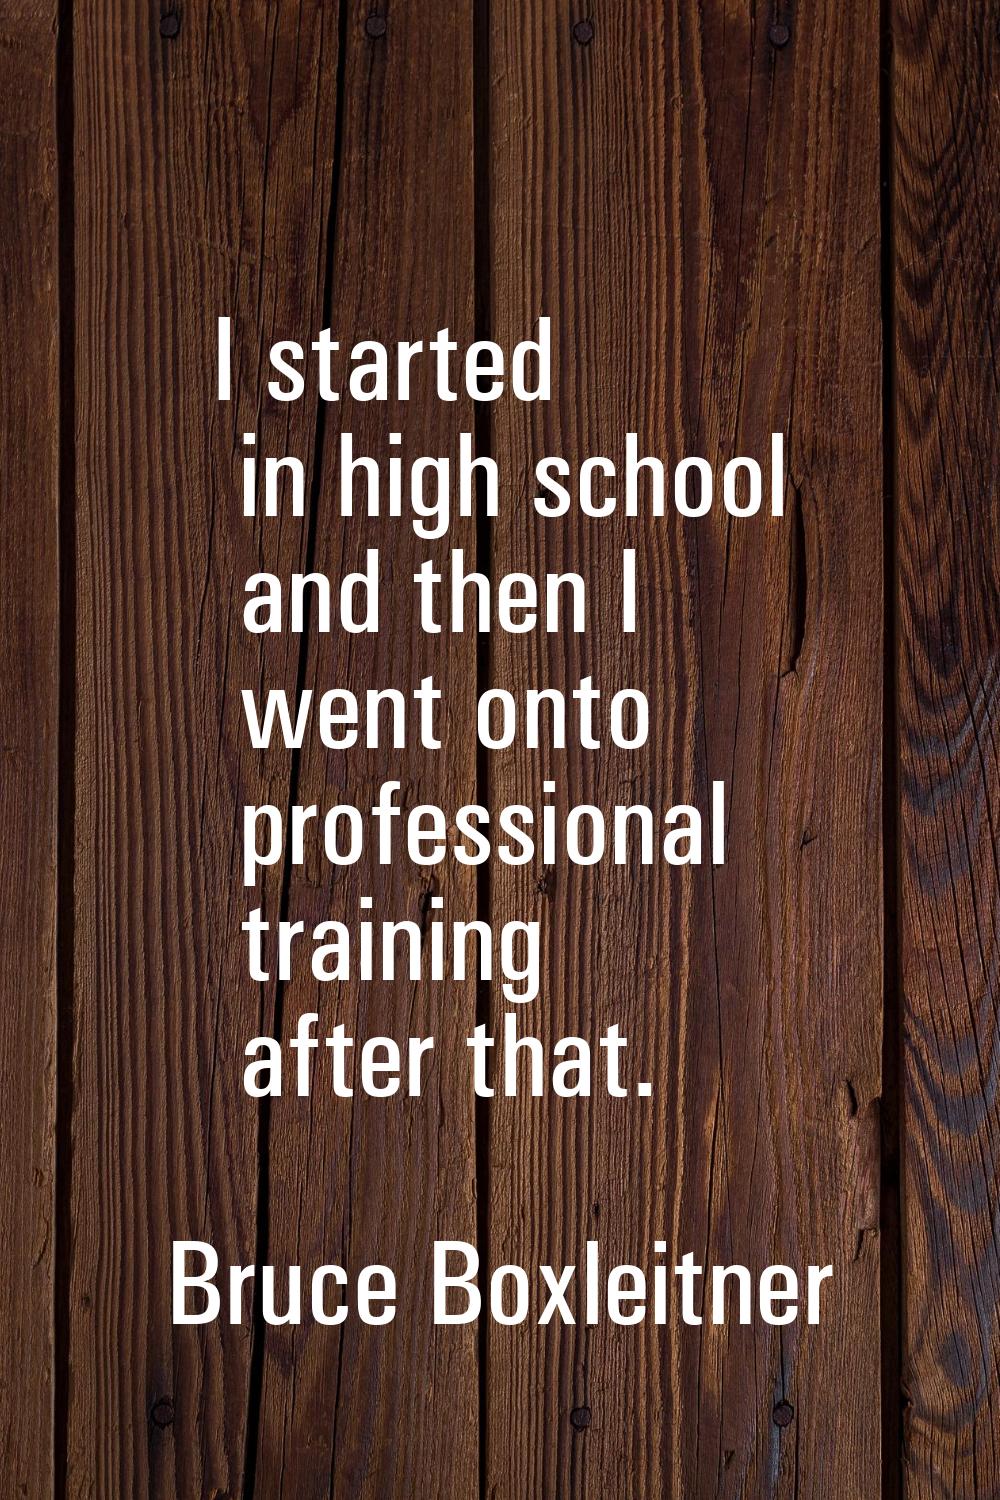 I started in high school and then I went onto professional training after that.